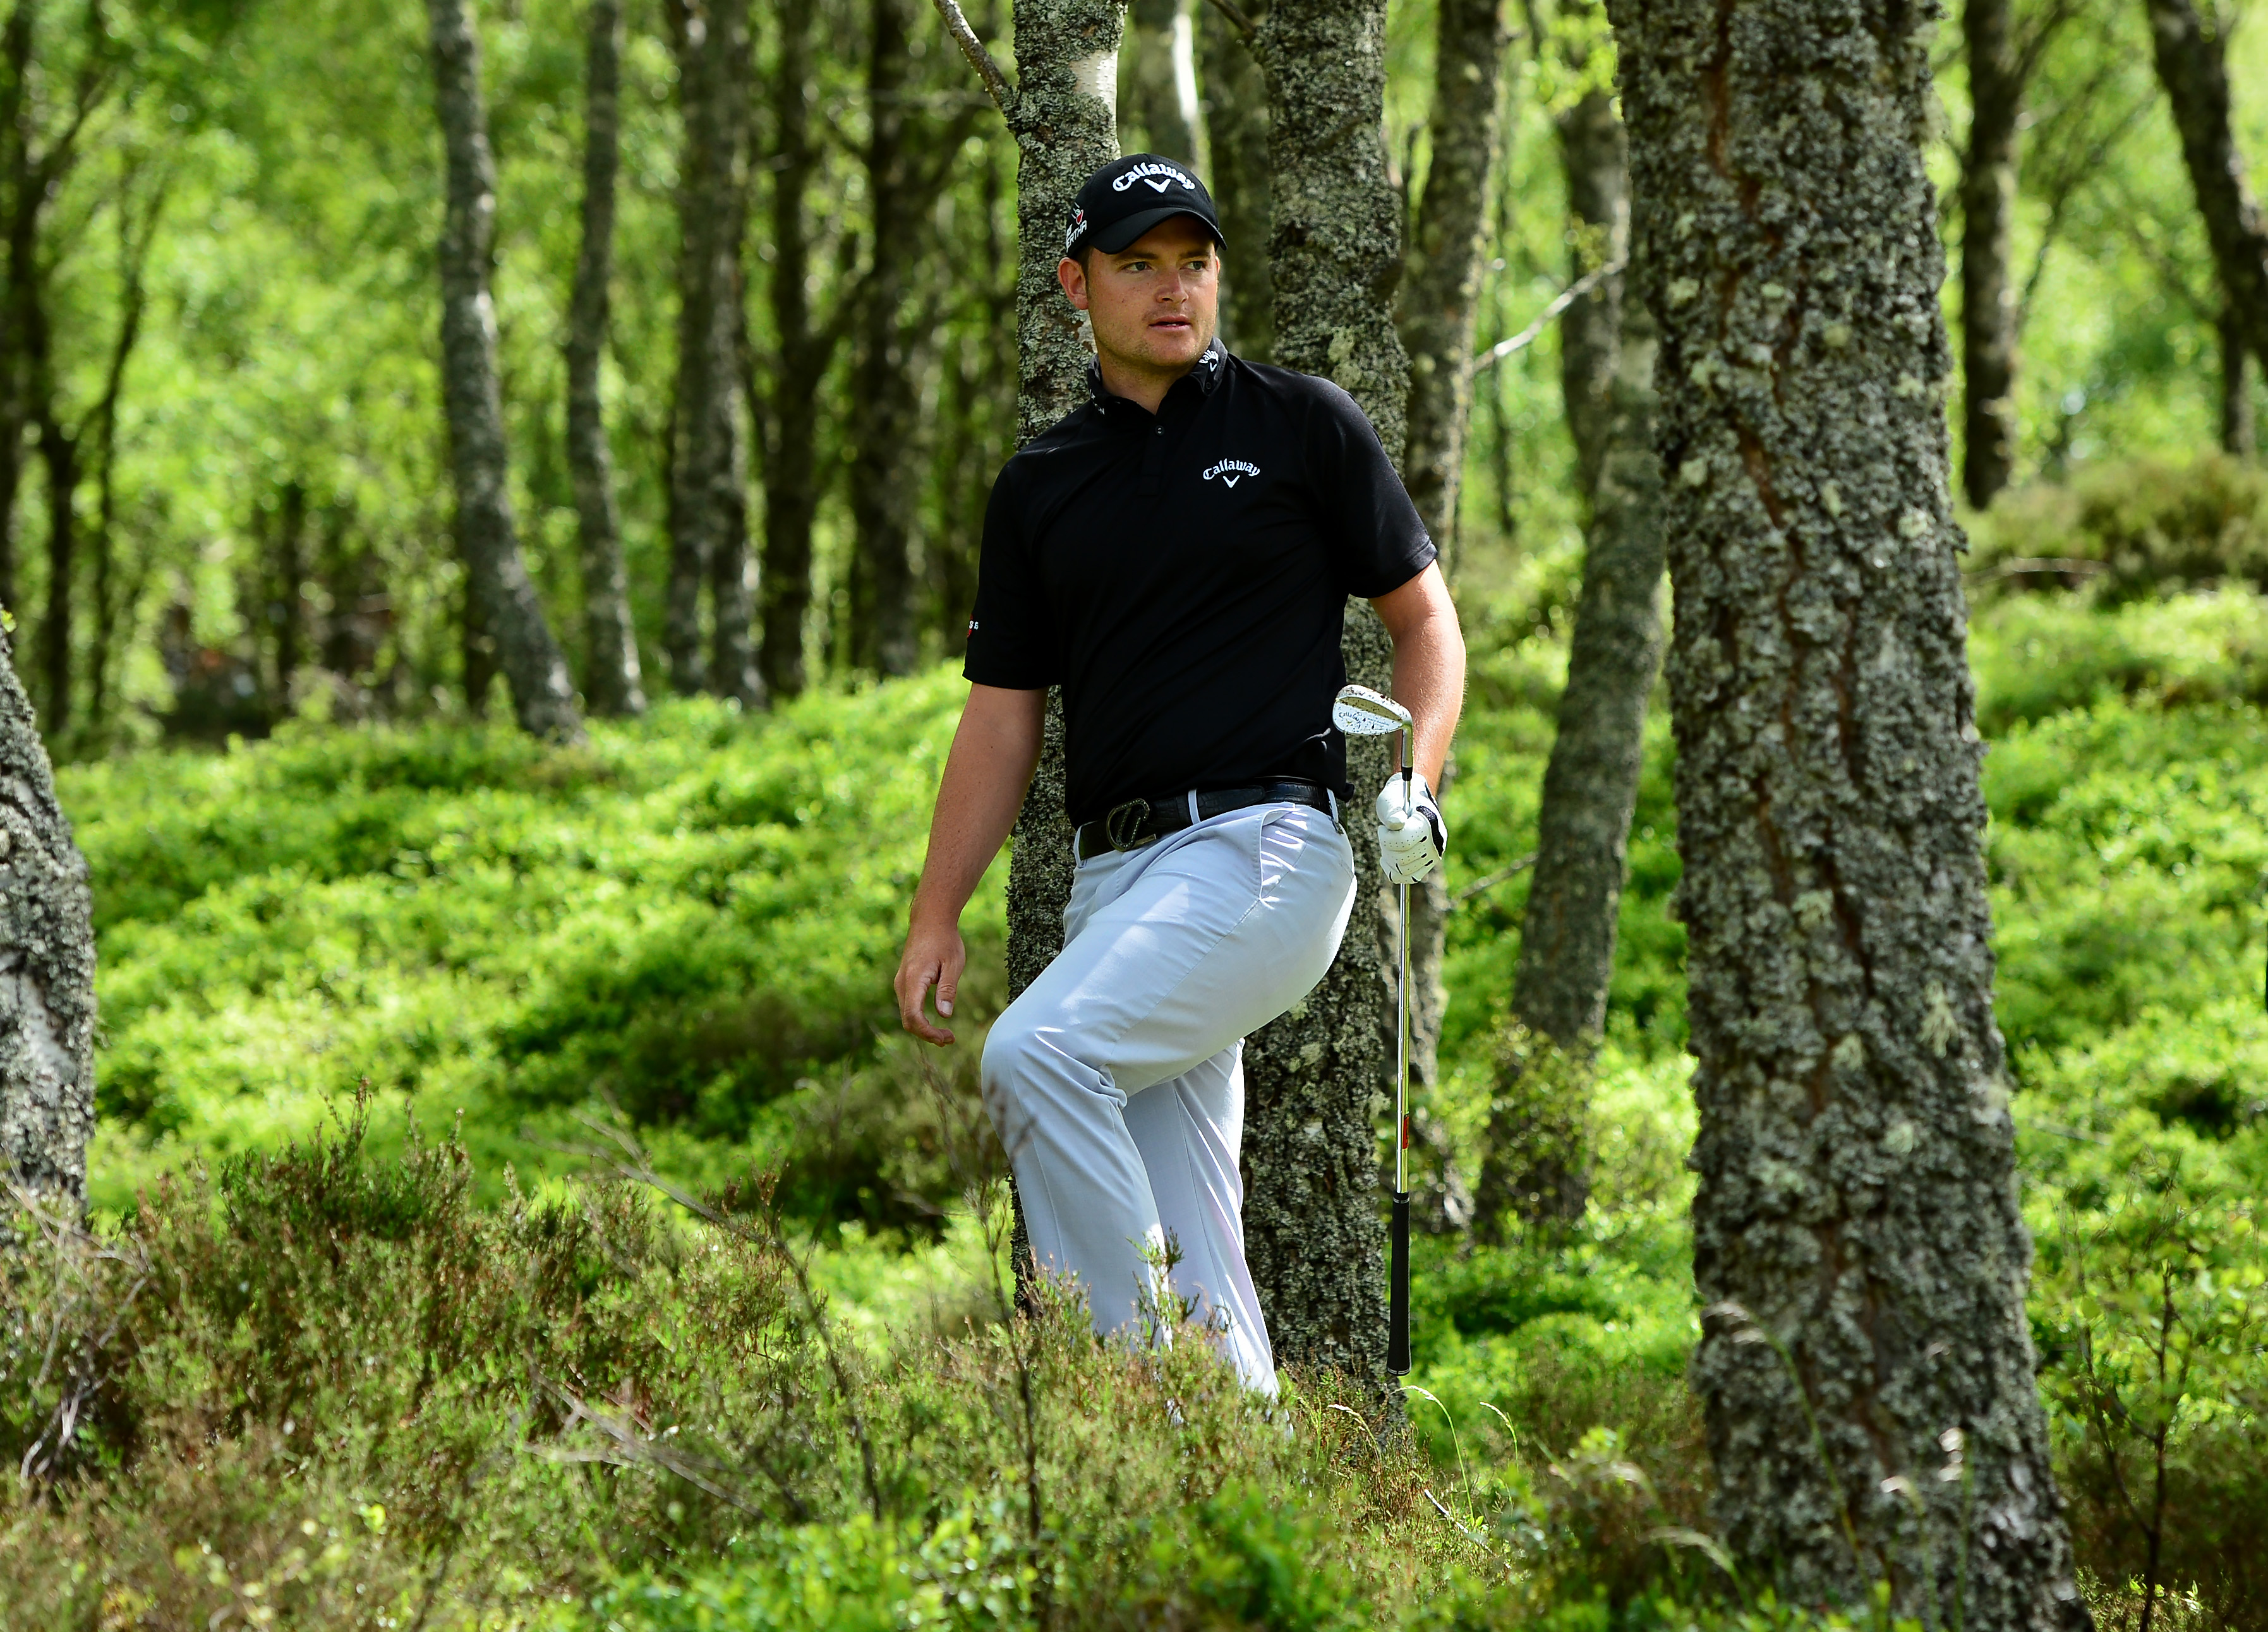 How much does it cost to chase the dream of playing pro golf on the European Tour?